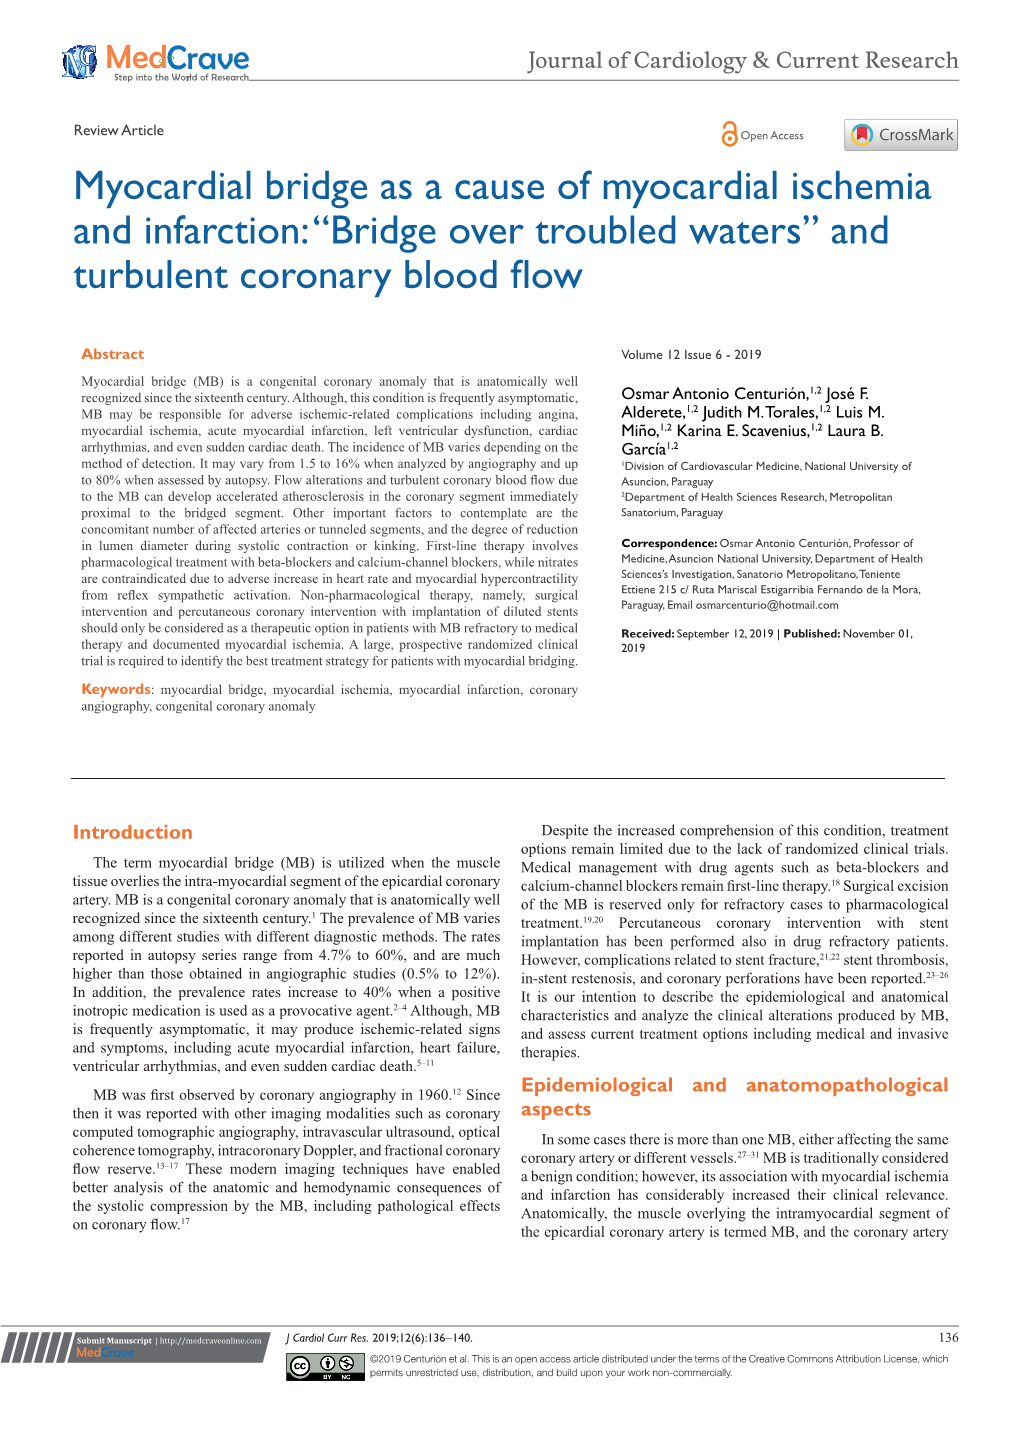 Myocardial Bridge As a Cause of Myocardial Ischemia and Infarction: “Bridge Over Troubled Waters” and Turbulent Coronary Blood Flow